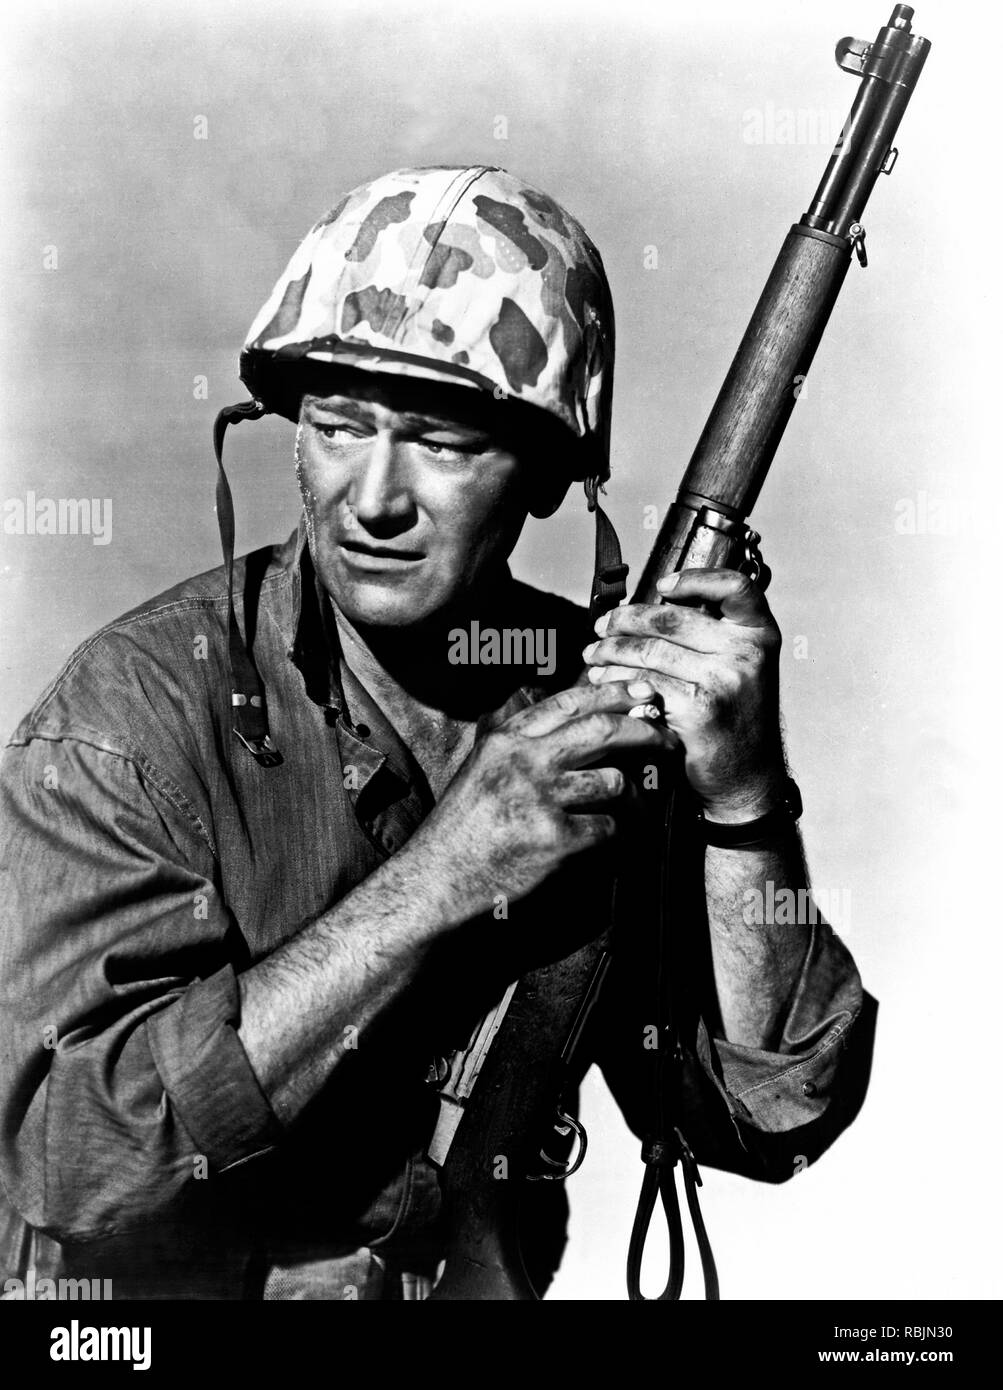 Sands of Iwo Jima is a 1949 war film starring John Wayne that follows a group of United States Marines from training to the Battle of Iwo Jima during World War II. The film also features John Agar, Adele Mara and Forrest Tucker, was written by Harry Brown and James Edward Grant, and directed by Allan Dwan. The picture was a Republic Pictures production. Credit: Hollywood Photo Archive / MediaPunch Stock Photo